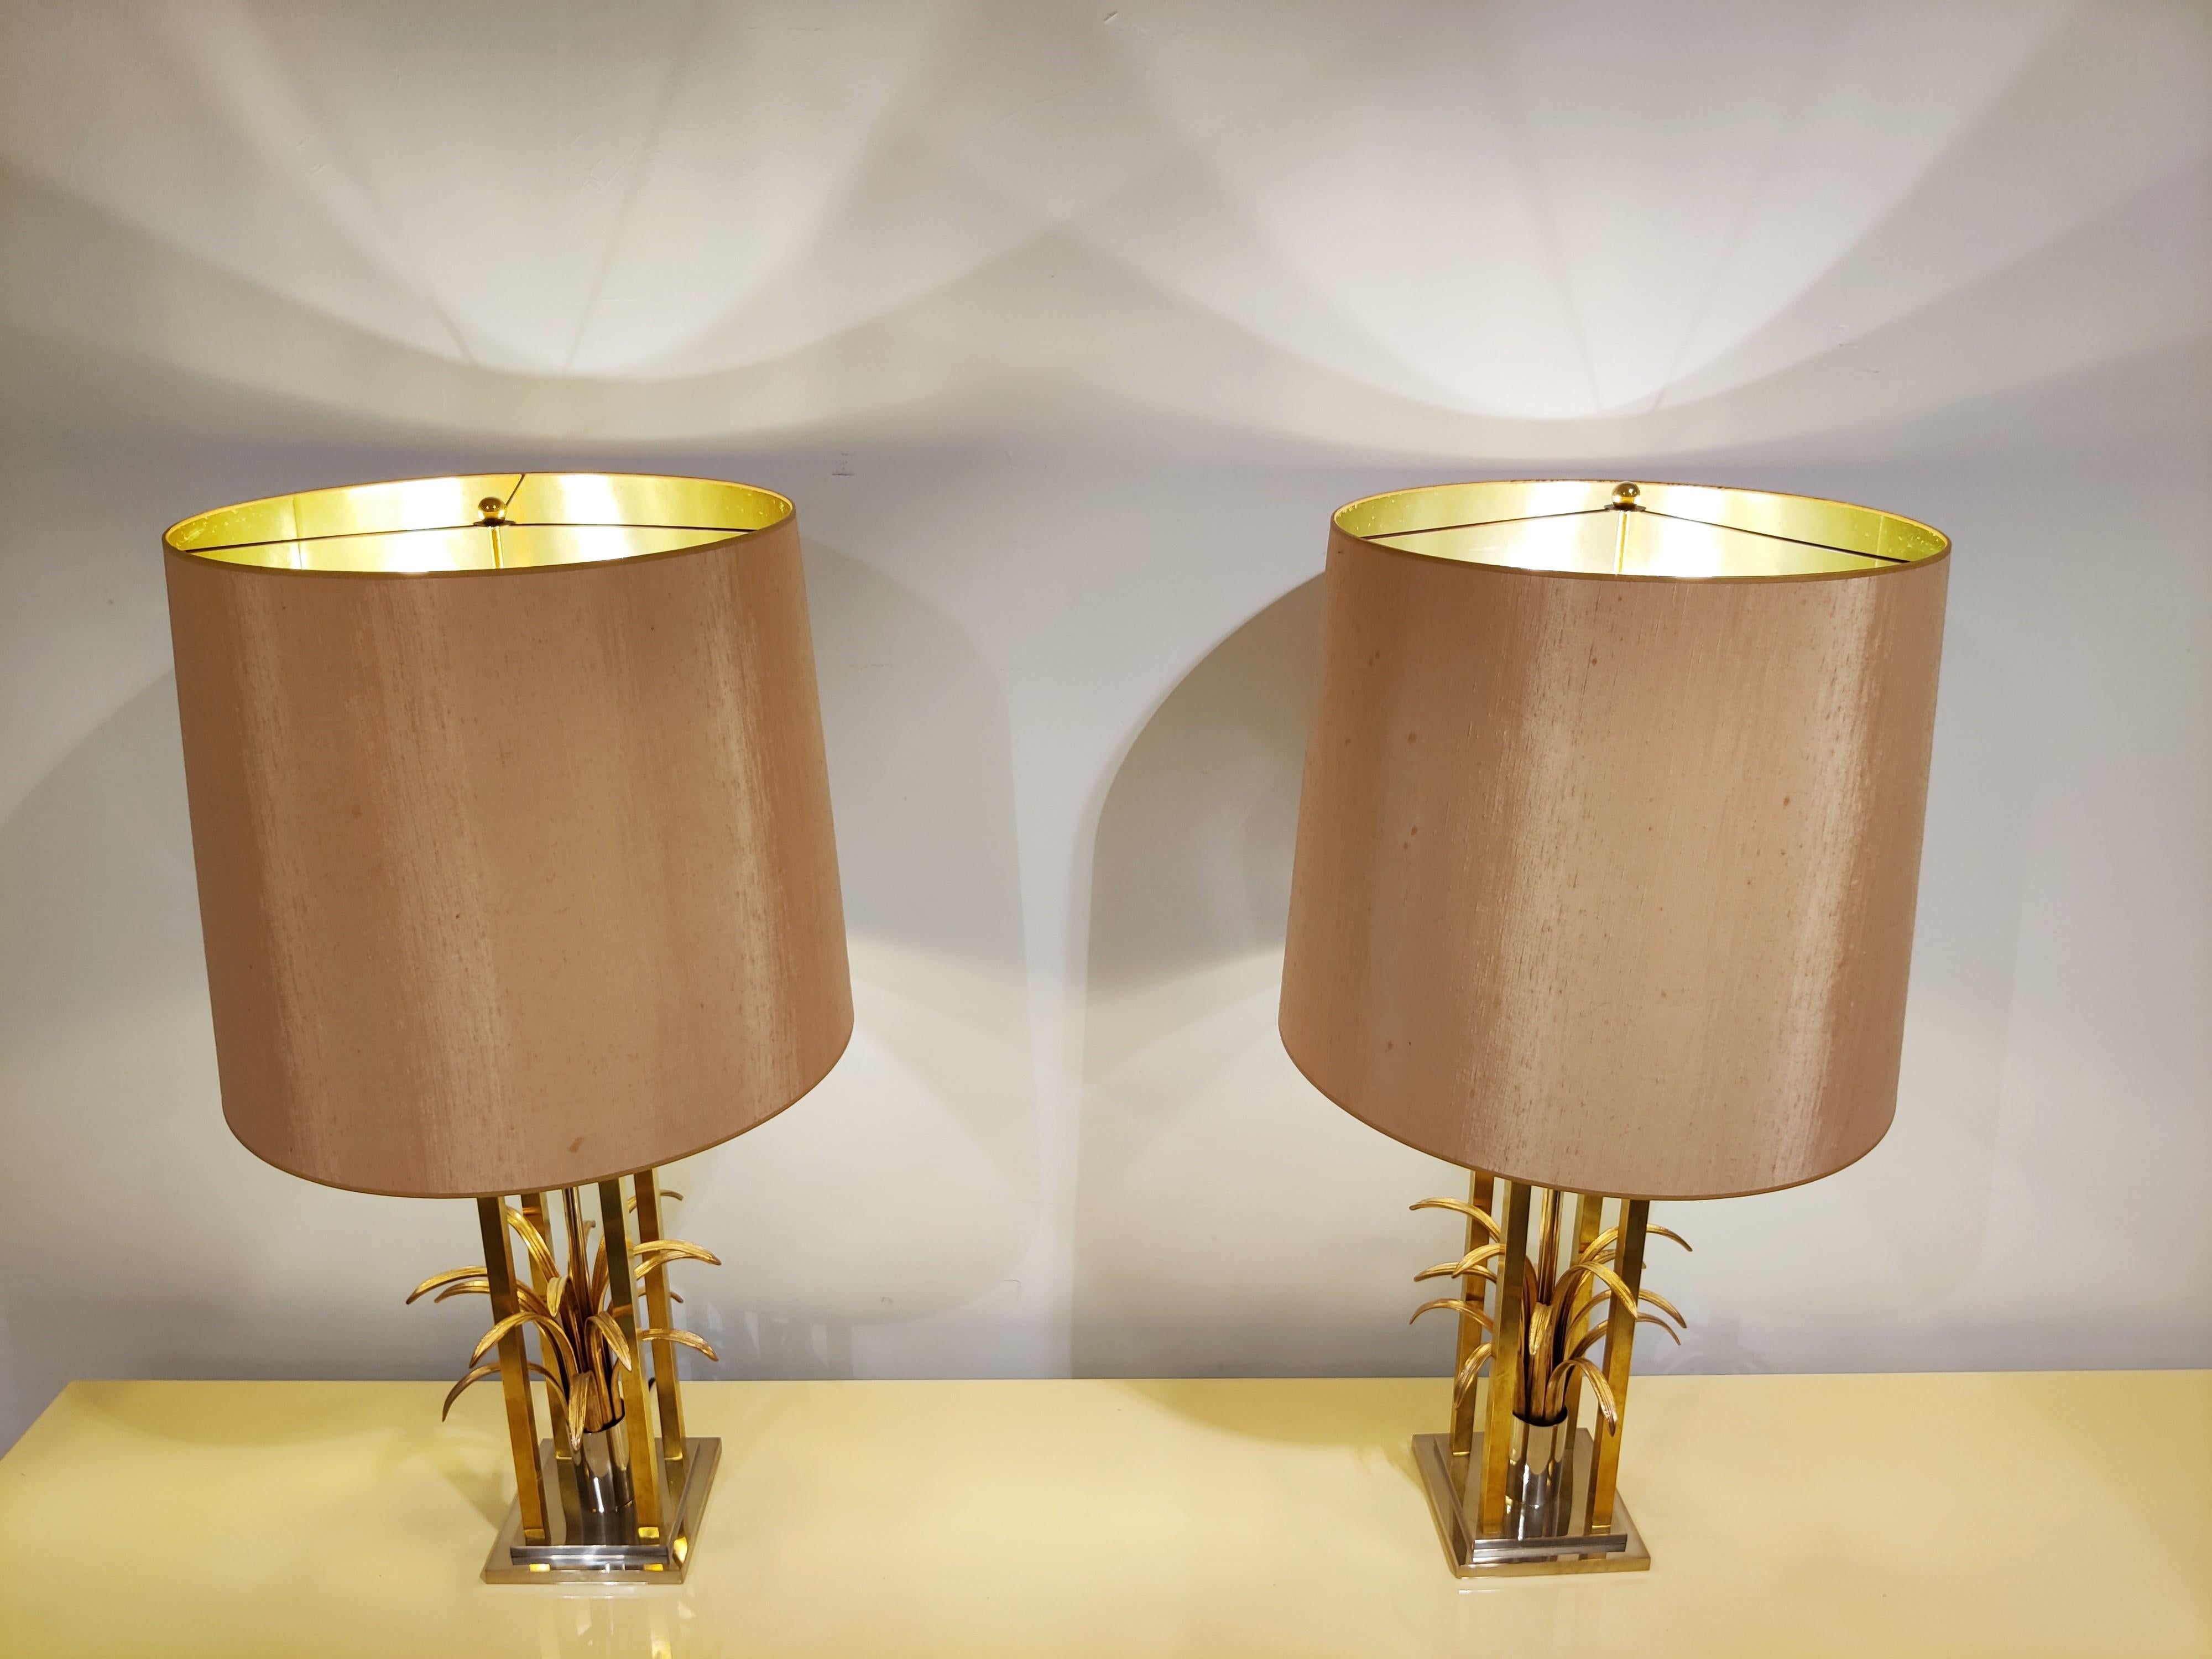 French Vintage Brass Pineapple Table Lamps, 1970s